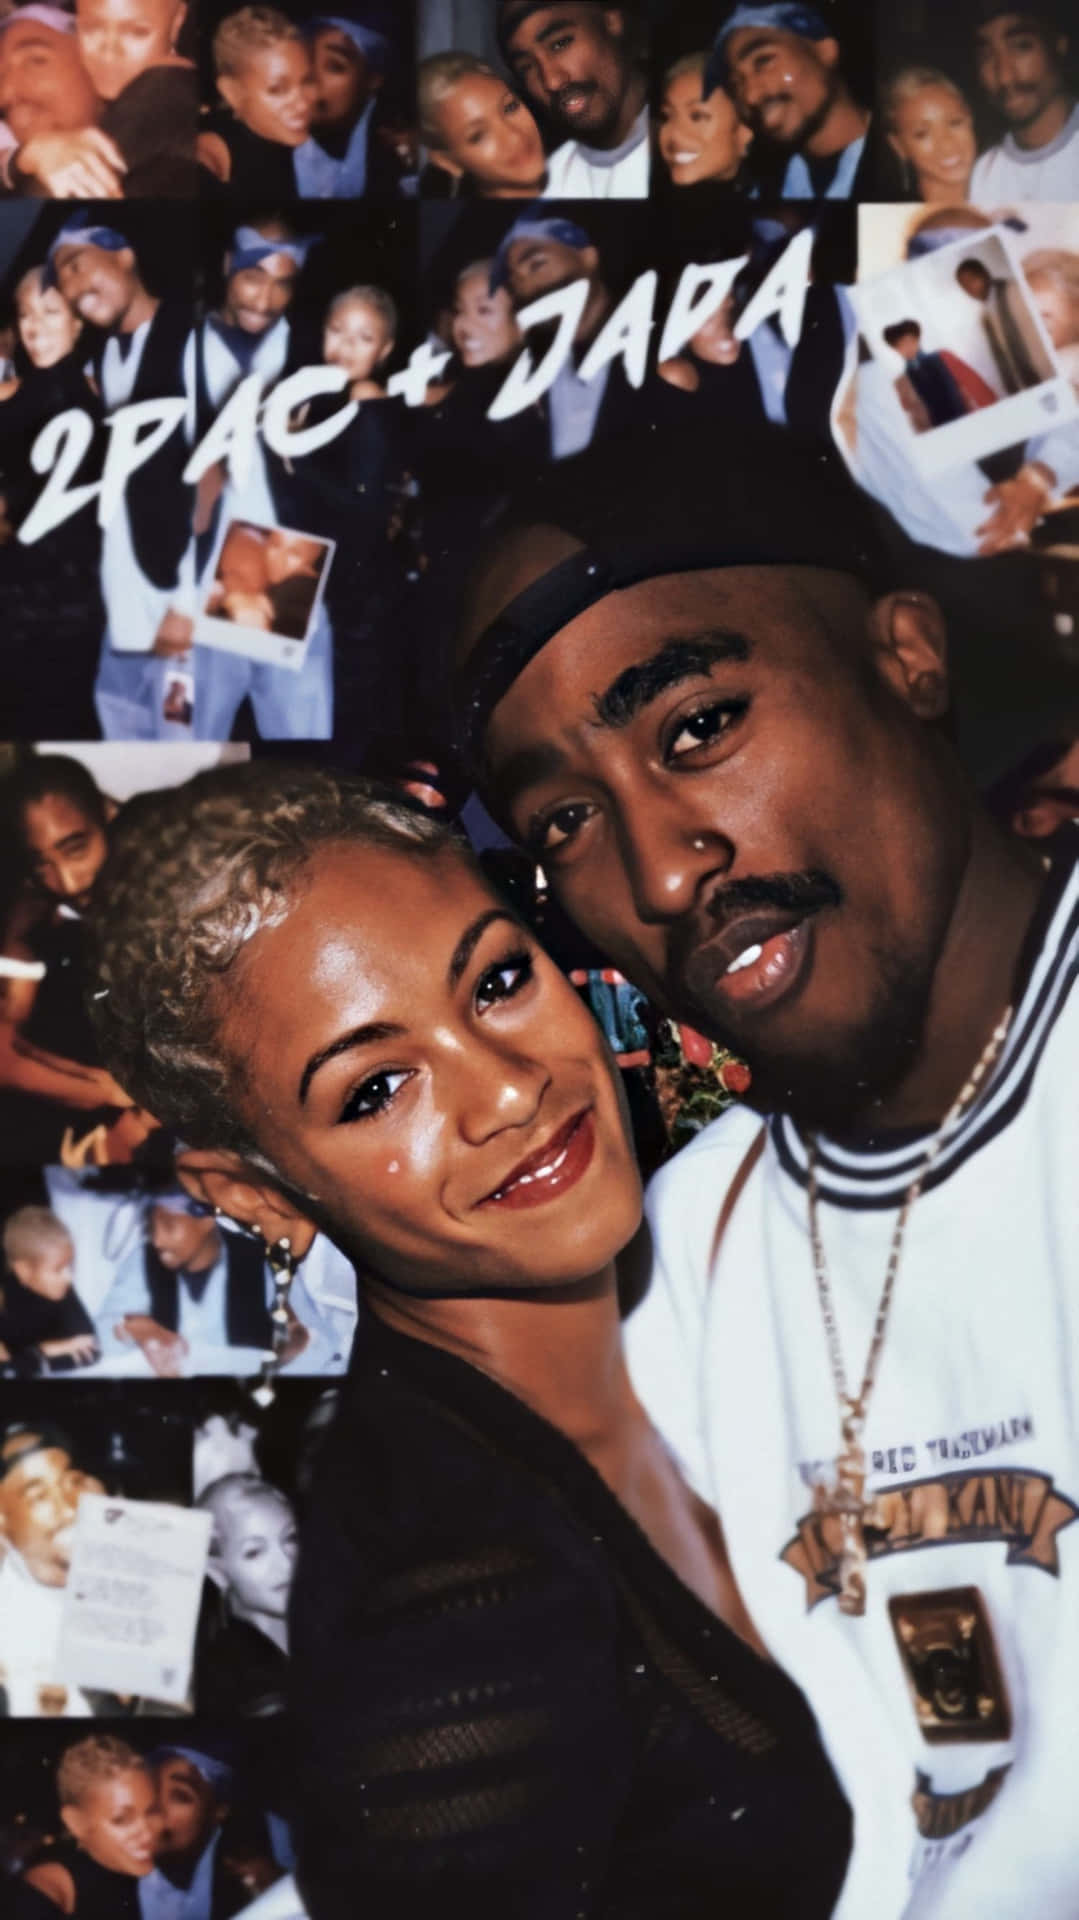 A couple posing for the camera in front of many pictures - Tupac